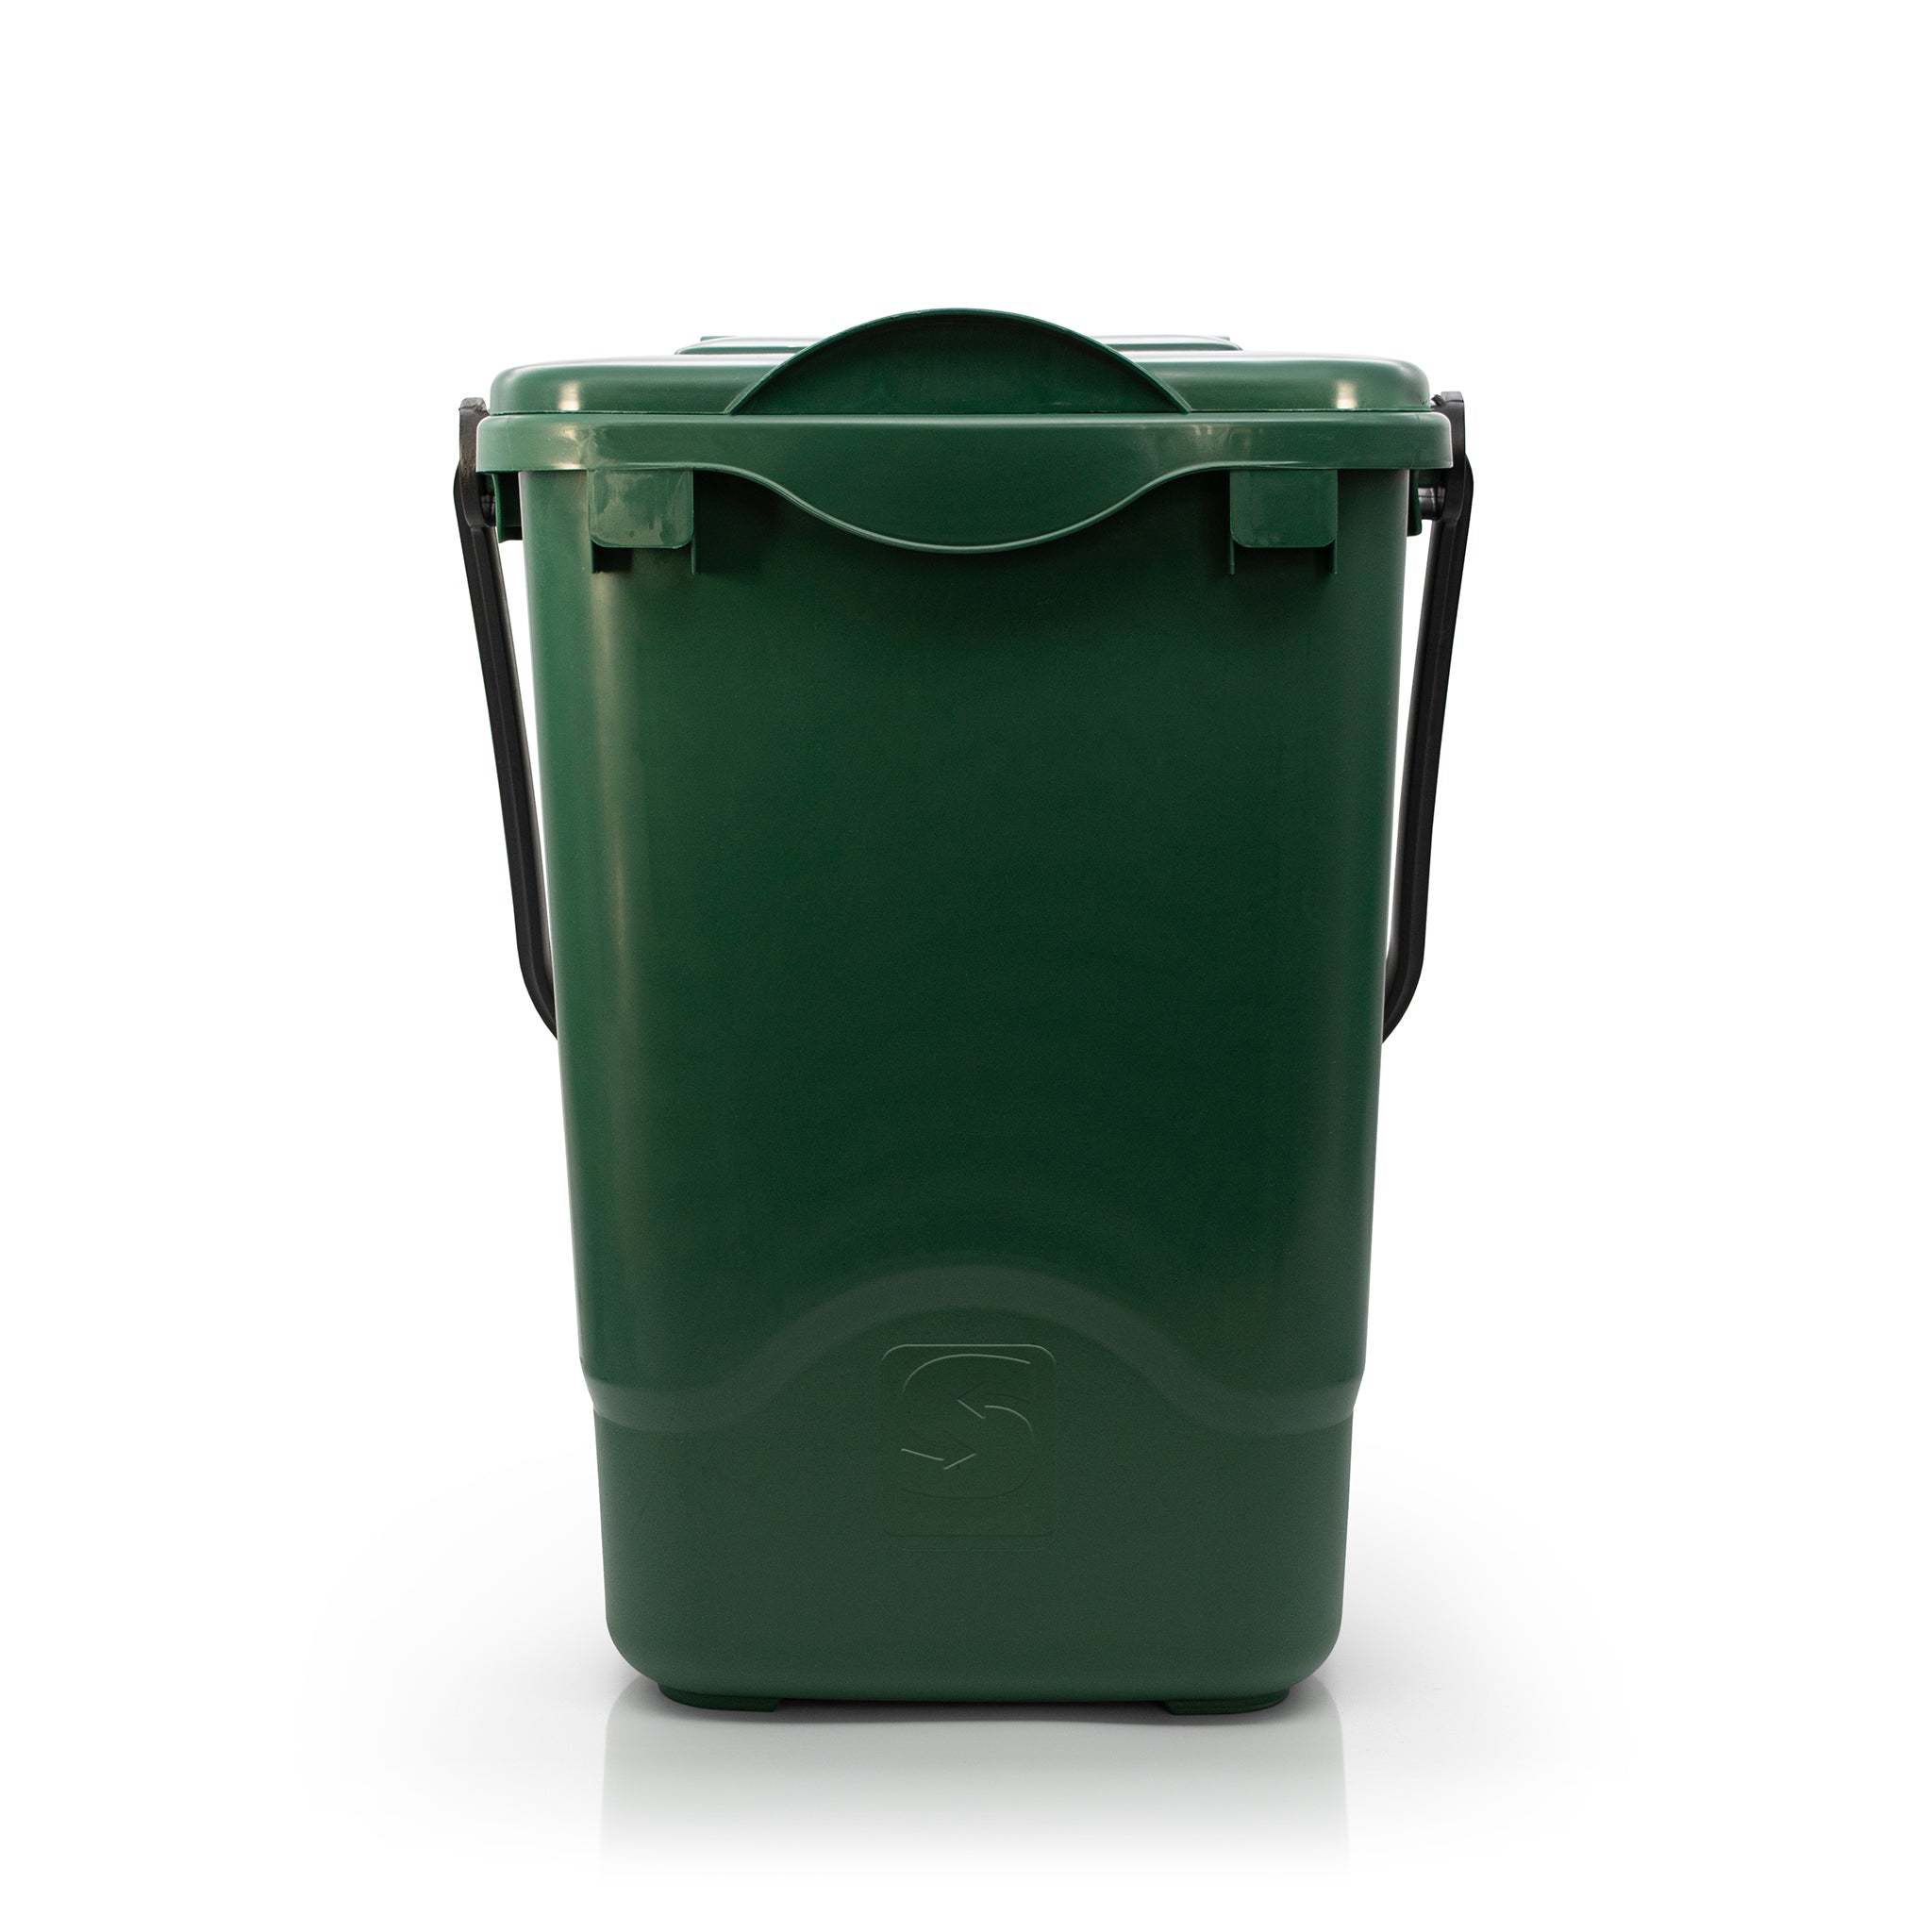 Front facing green bin made from recycled plastic with lockable lid